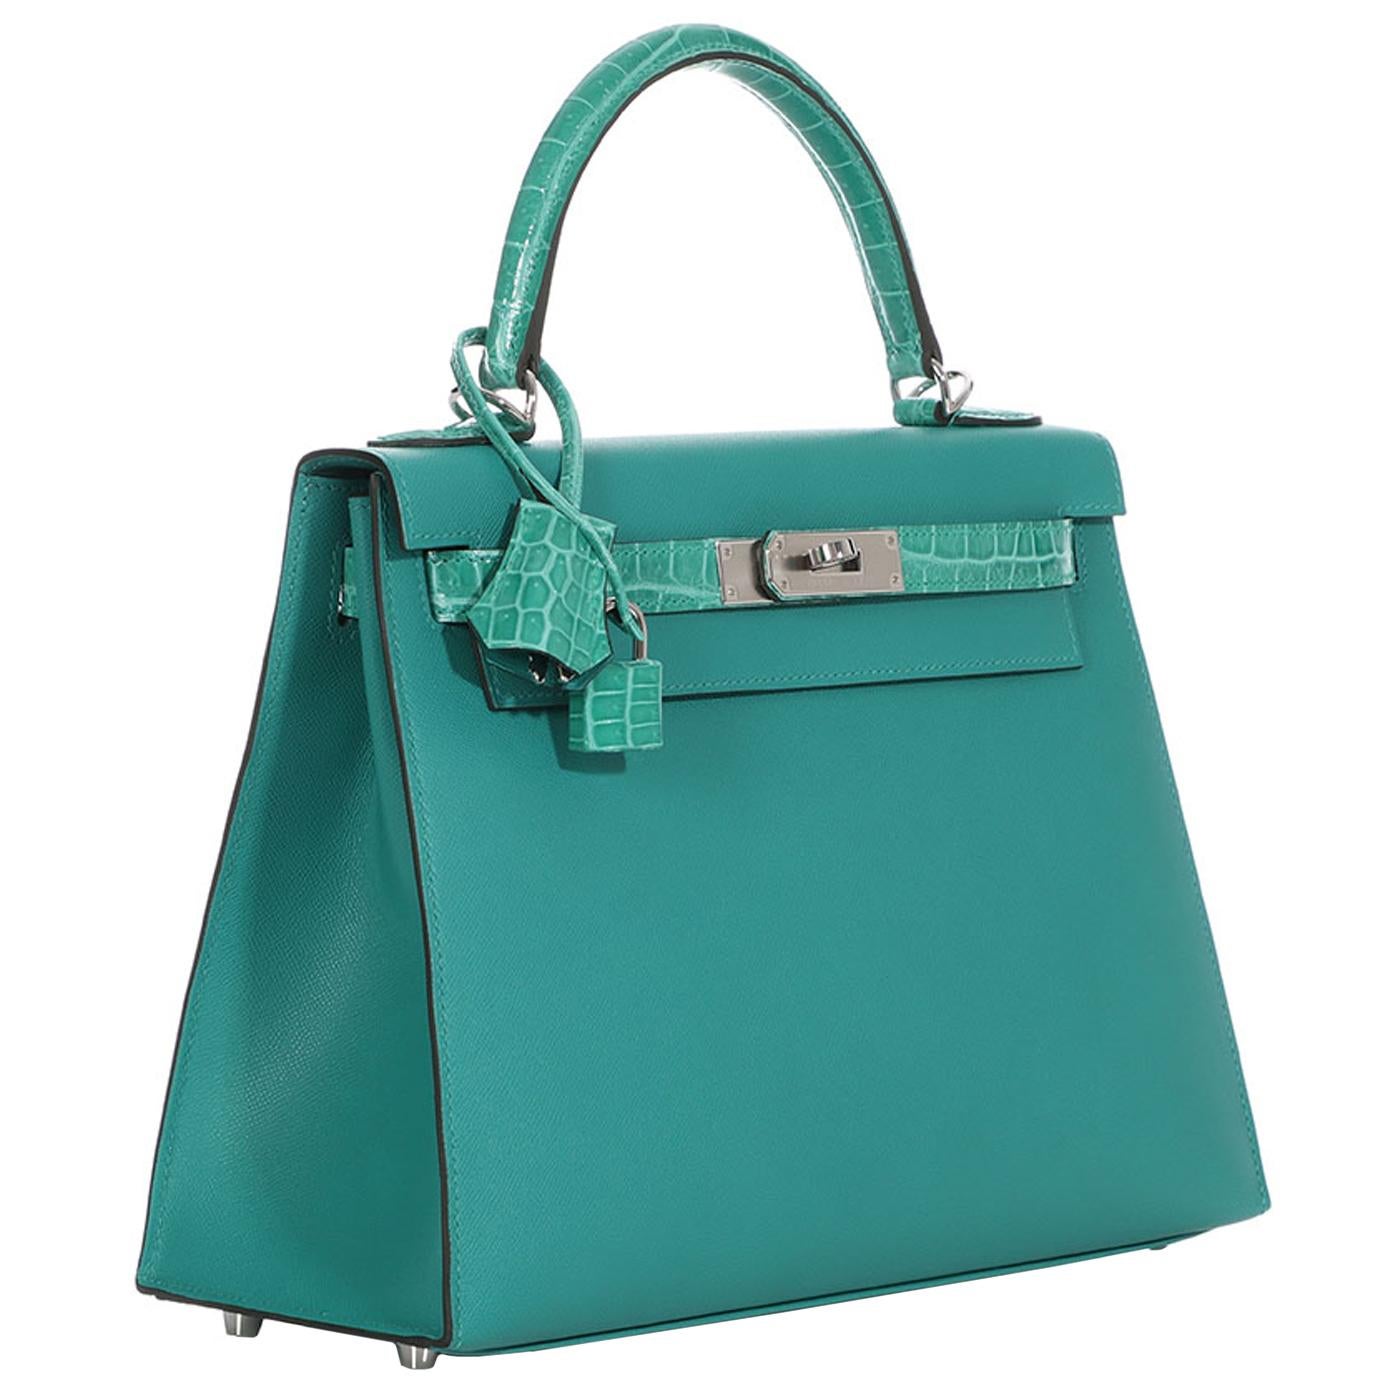 This Kelly, in the Sellier style, is in Vert Verone madame leather and Crocodile Sellier with palladium hardware, front flap, two straps with center toggle closure, clochette with lock and two keys, single rolled top handle, and removable shoulder